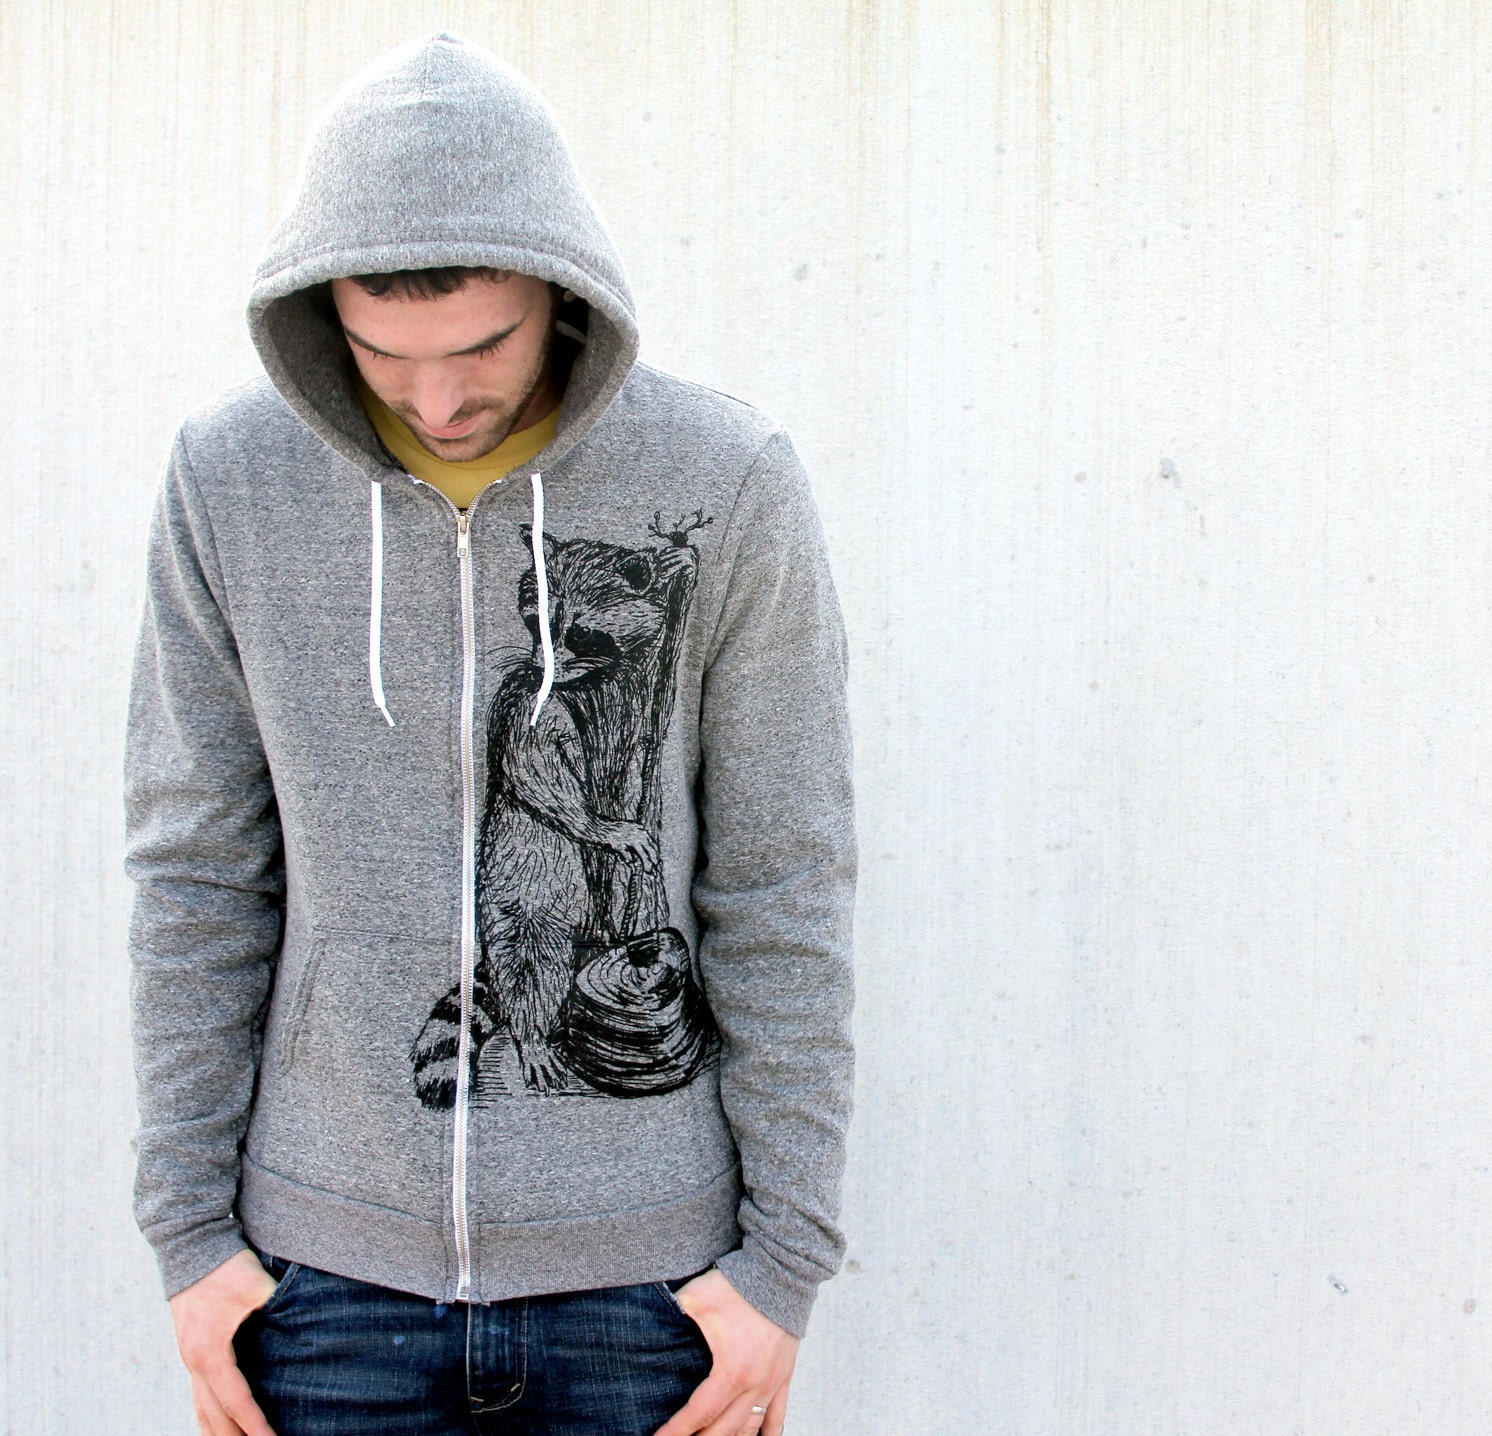 Mens Woodland RACCOON Peppered Grey Hoodie american apparel XS S M L (Custom Color Options) - darkcycleclothing